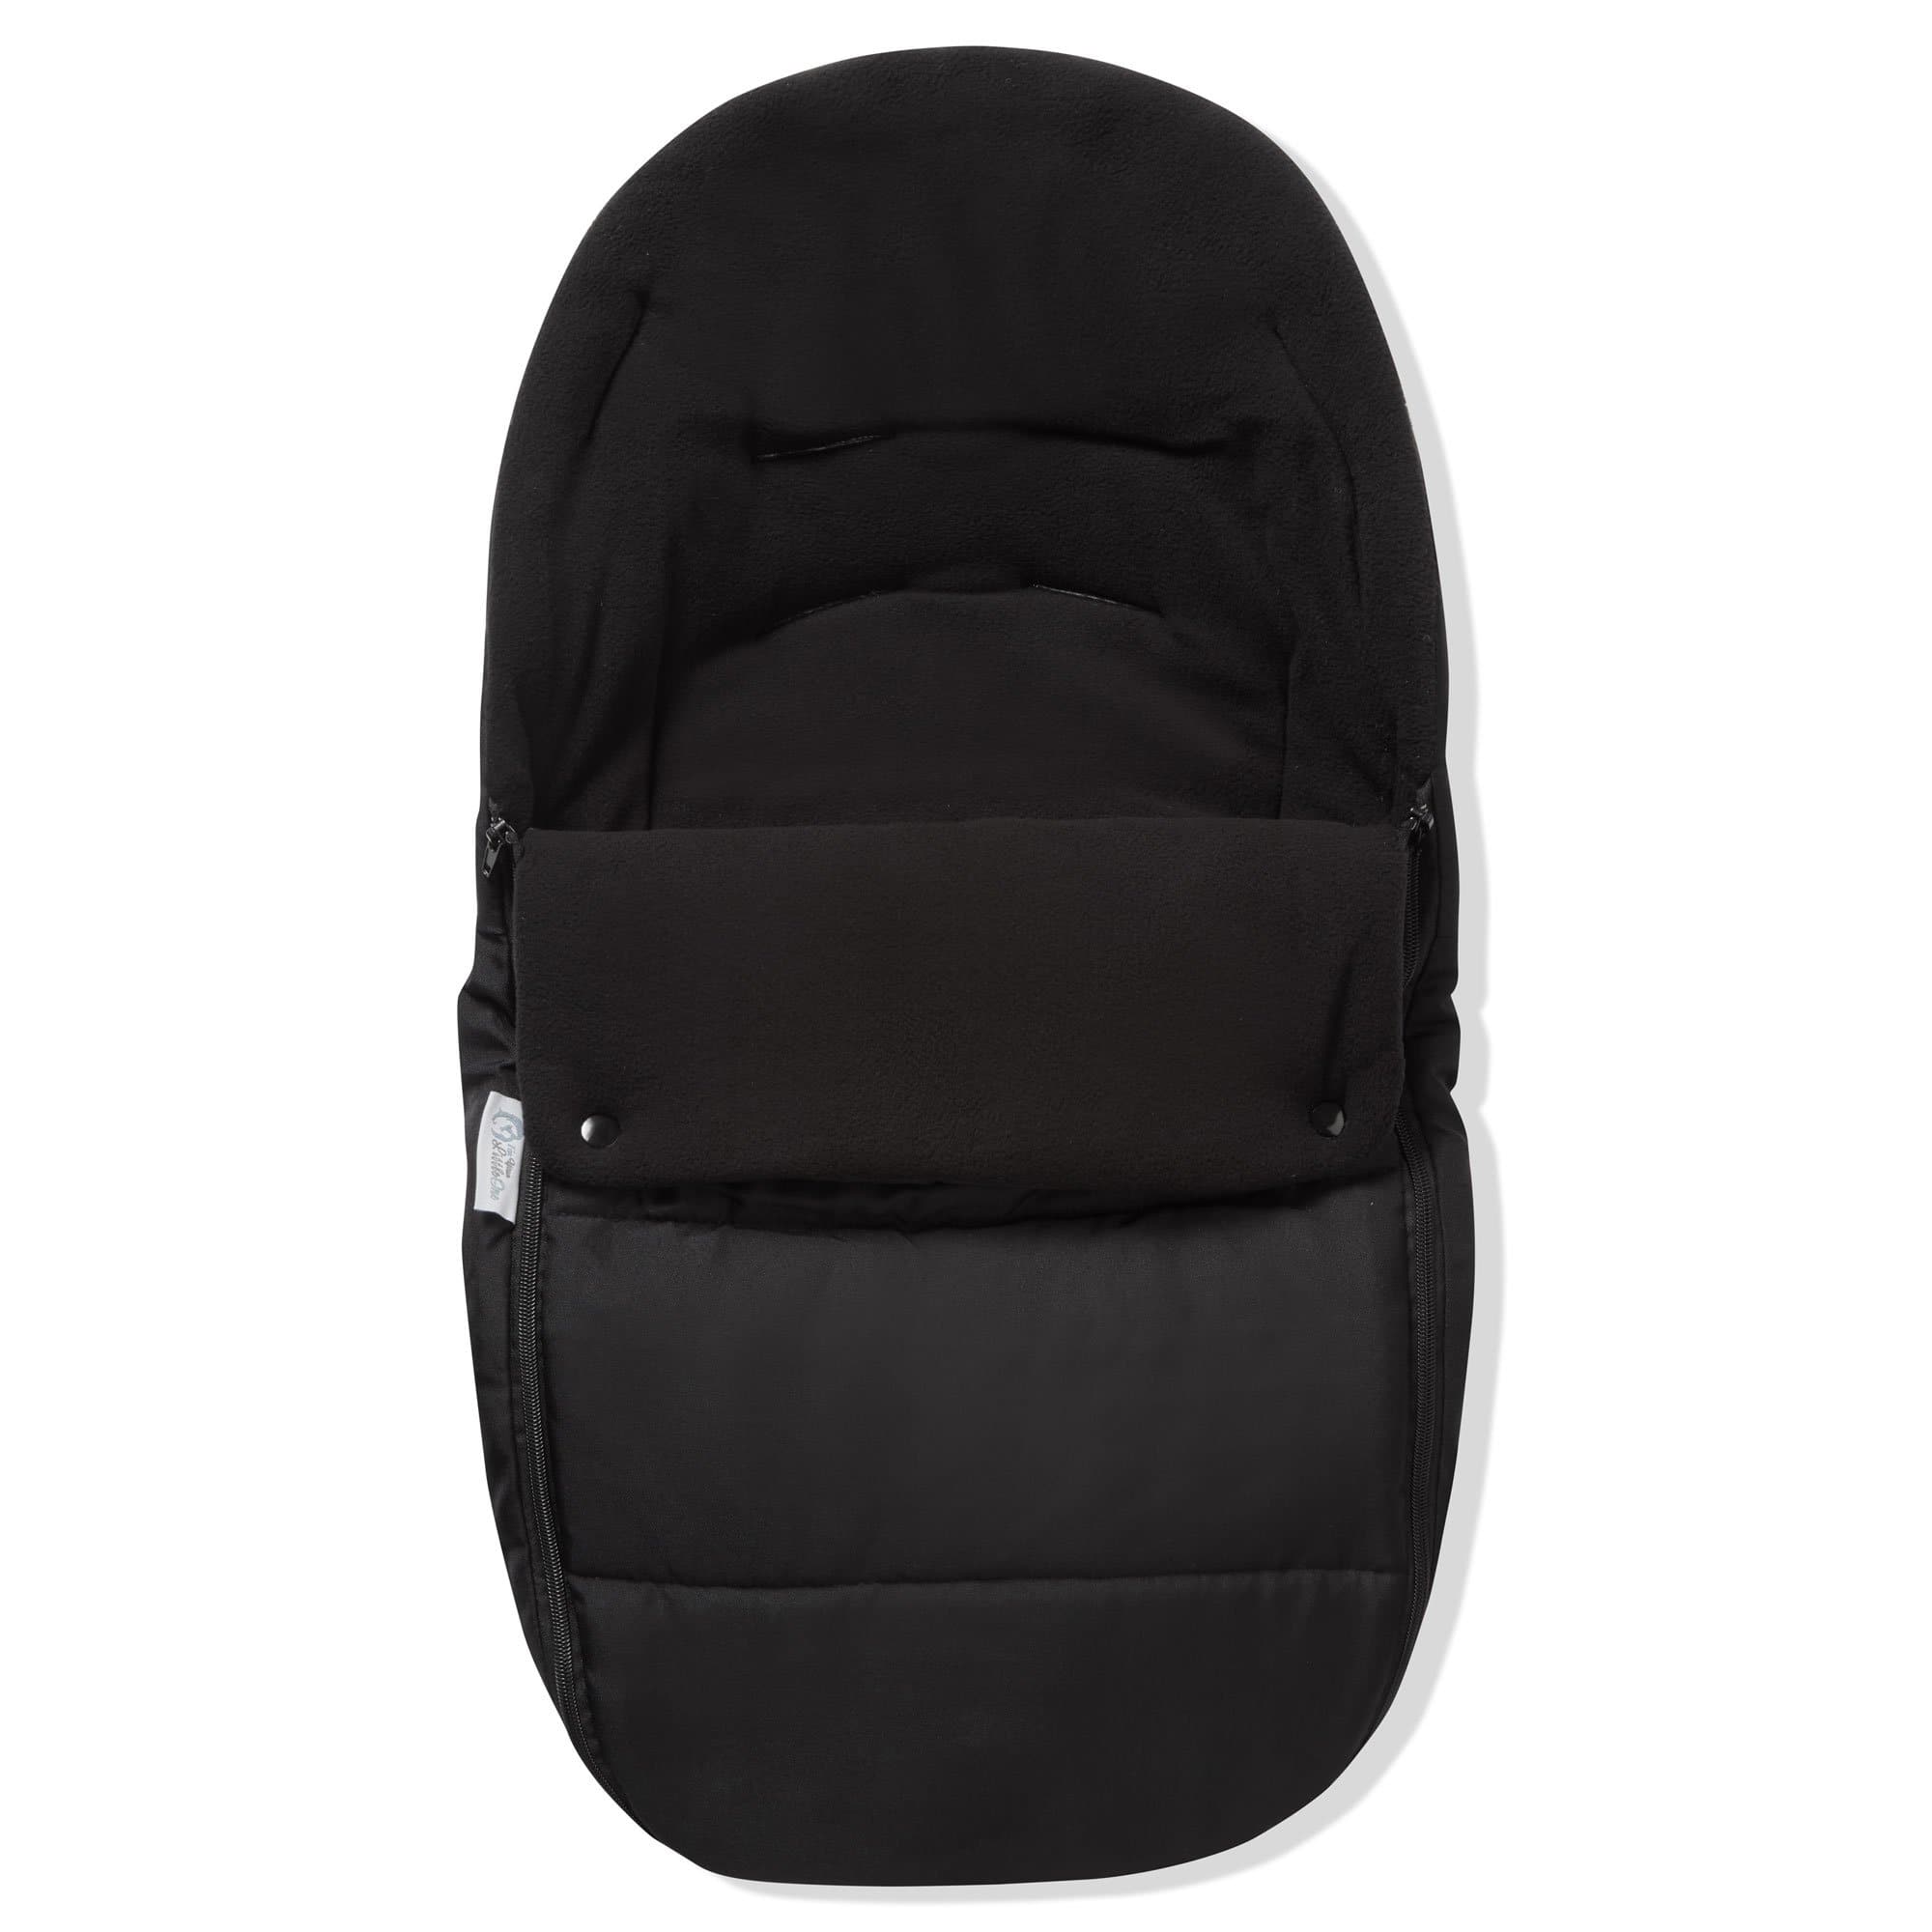 Universal Premium Car Seat Footmuff / Cosy Toes - For Your Little One